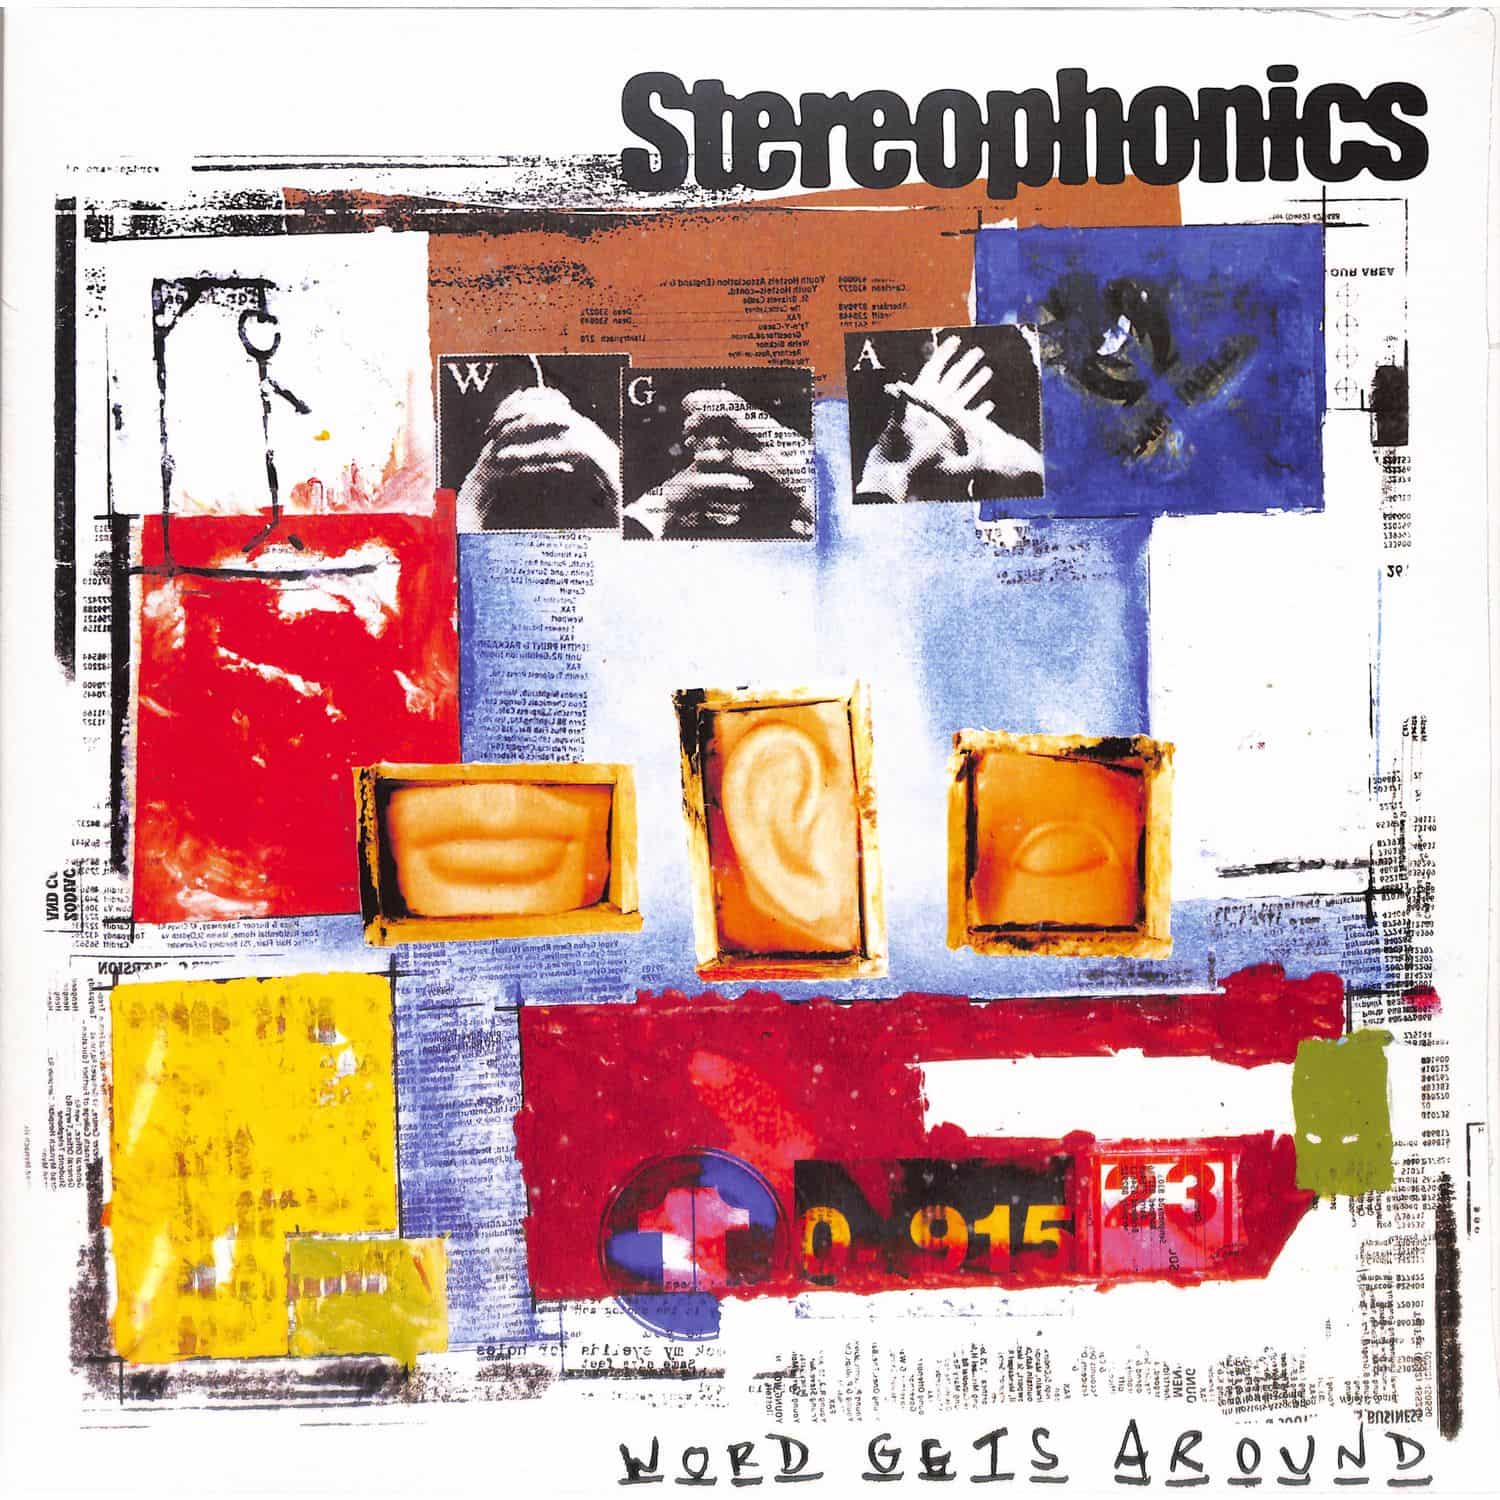 Stereophonics - WORD GETS AROUND 